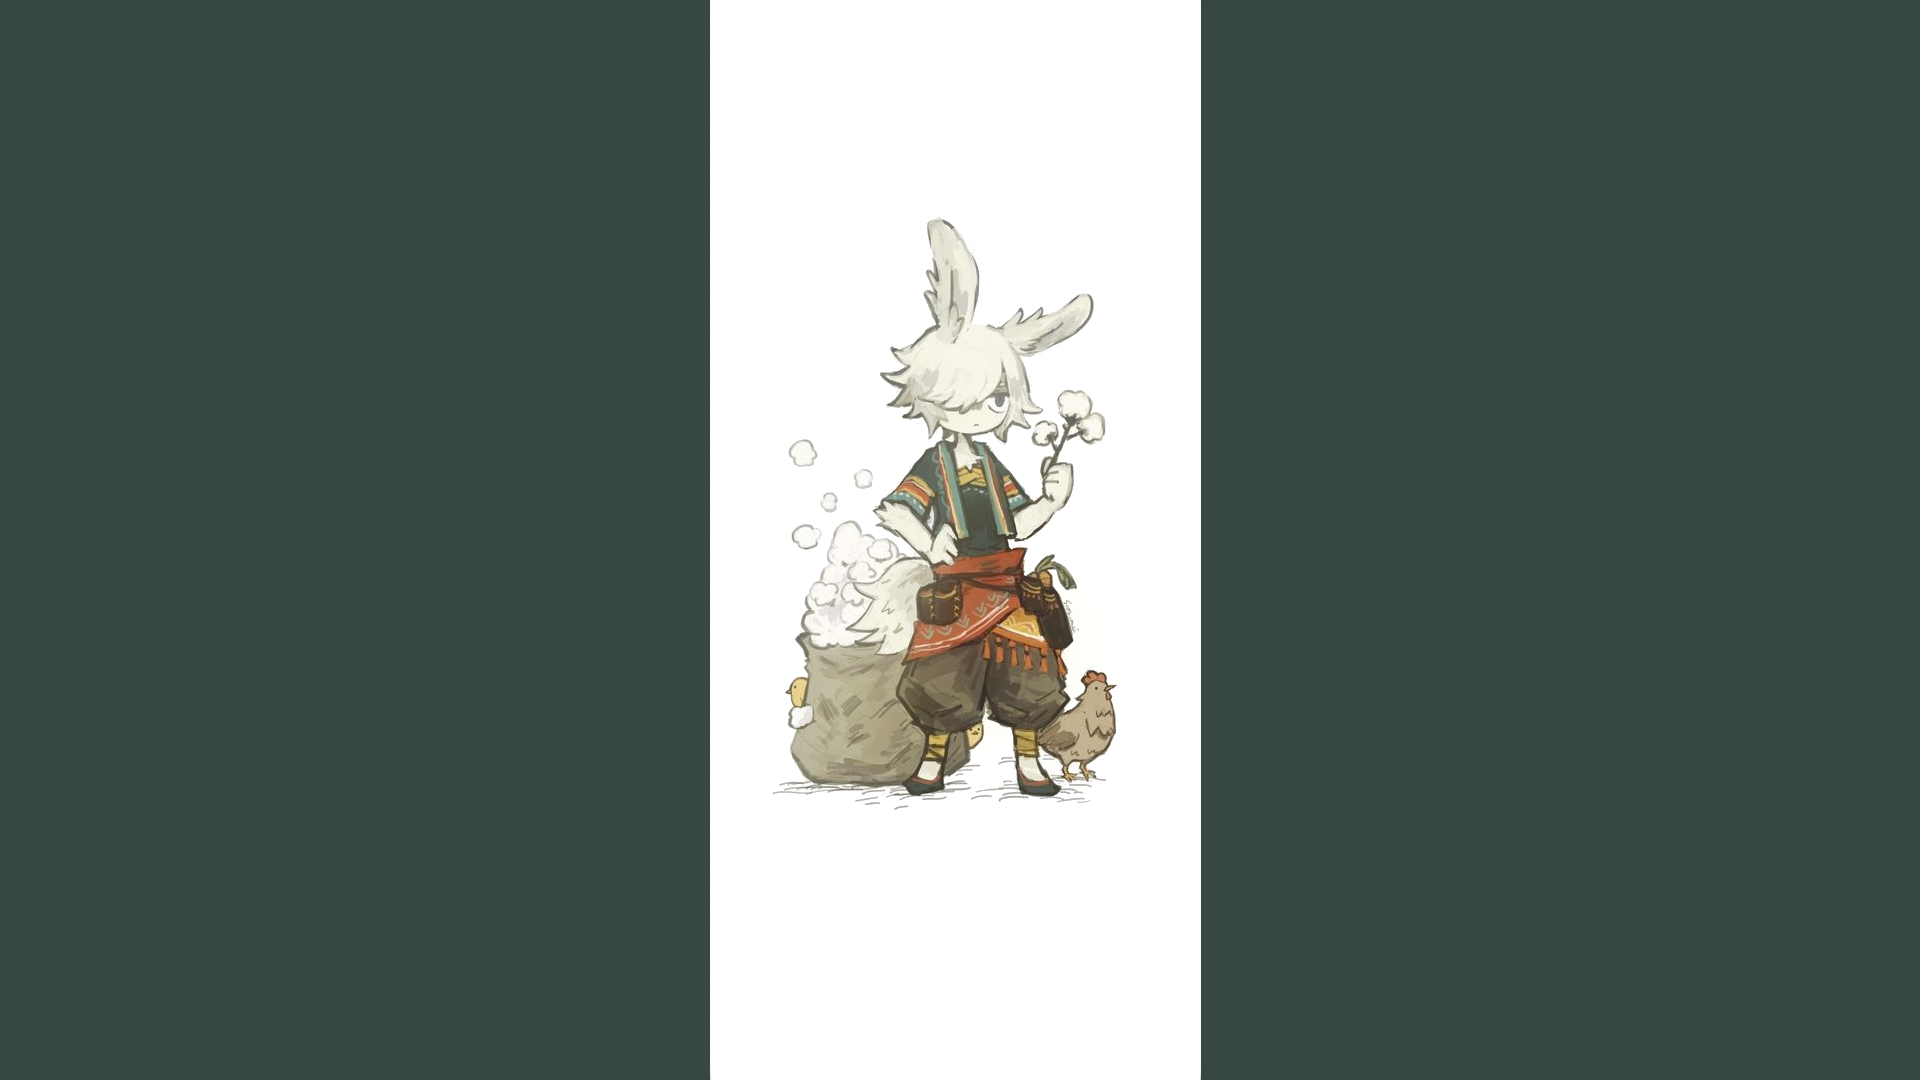 Rabbits Bunny Ears Chickens Cotton Tail White Hair Bag White Background Furry 1920x1080